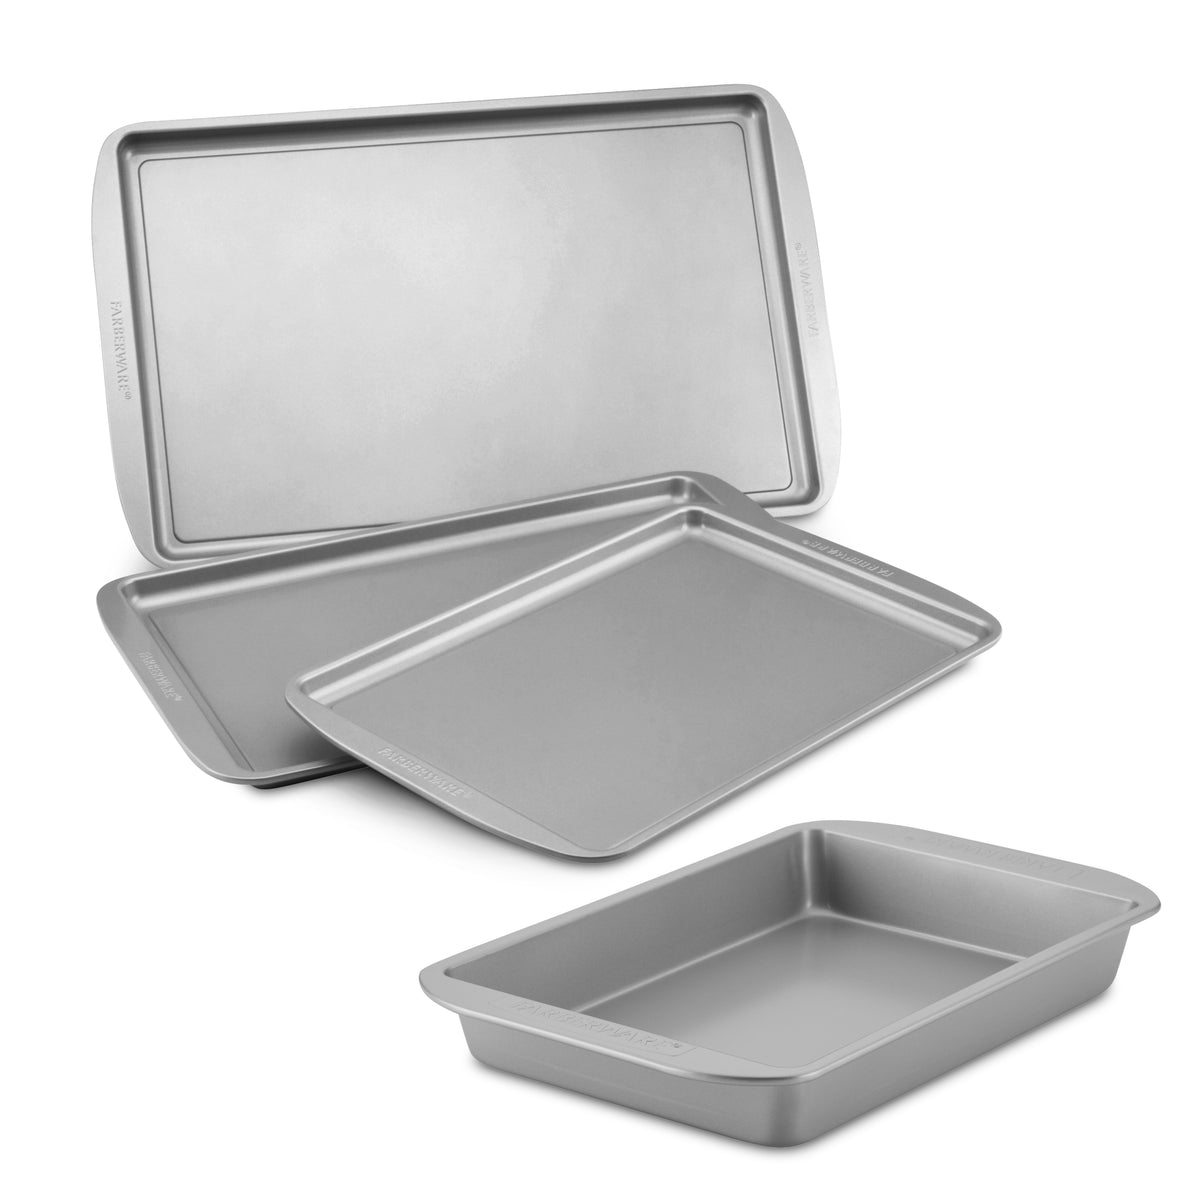 The $43 Farberware Nonstick Bakeware Set Is a Kitchen Must-Have